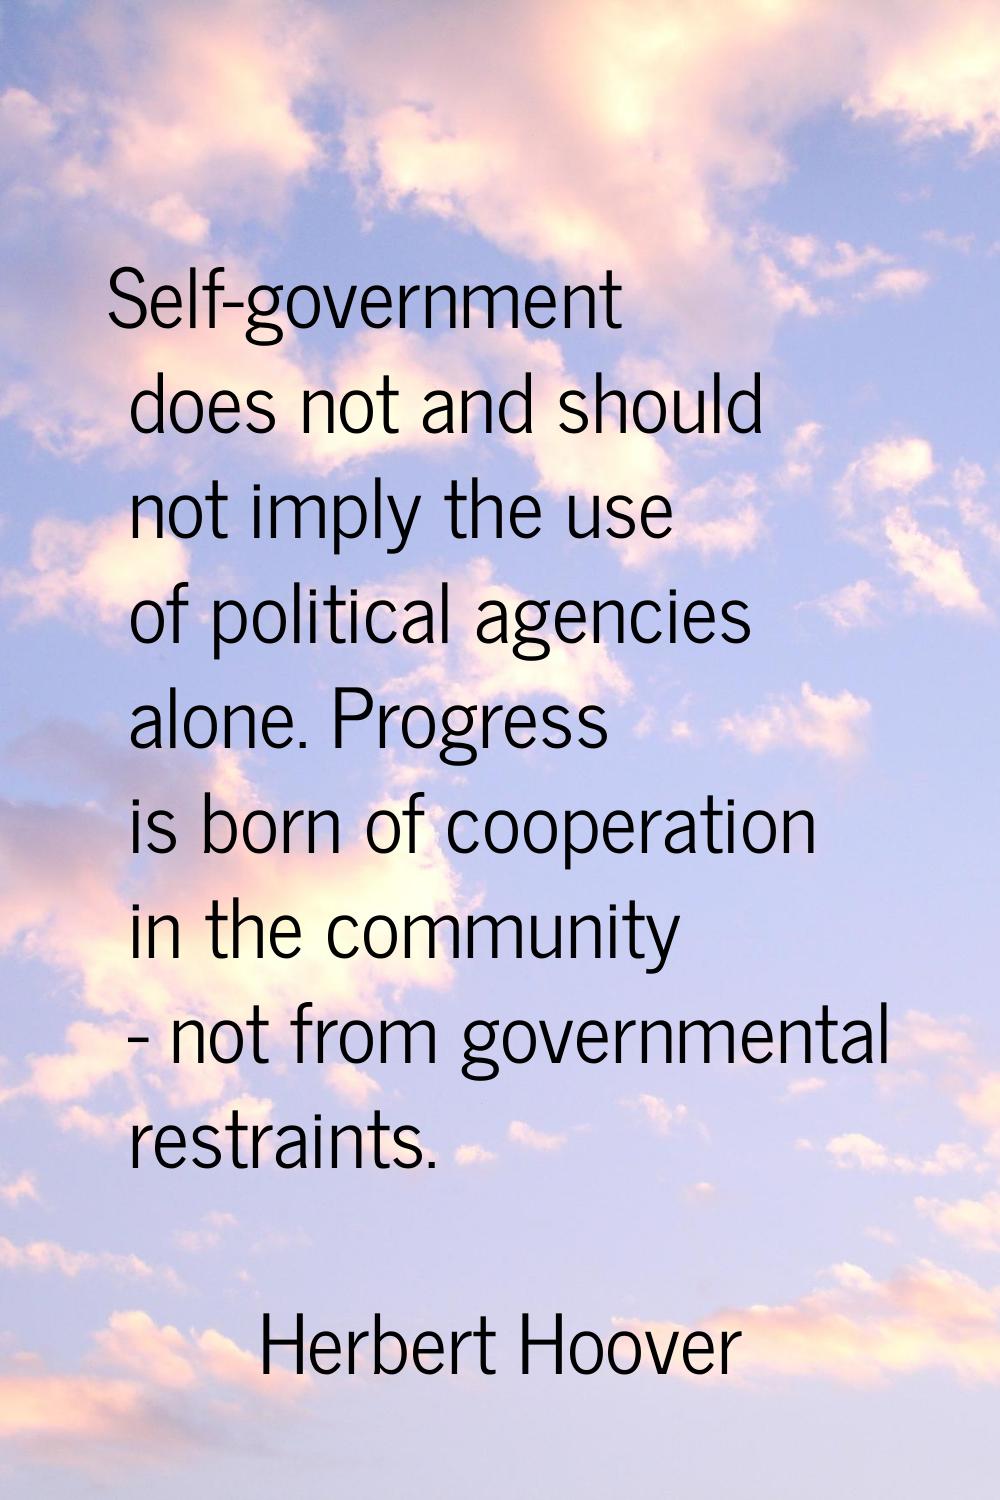 Self-government does not and should not imply the use of political agencies alone. Progress is born